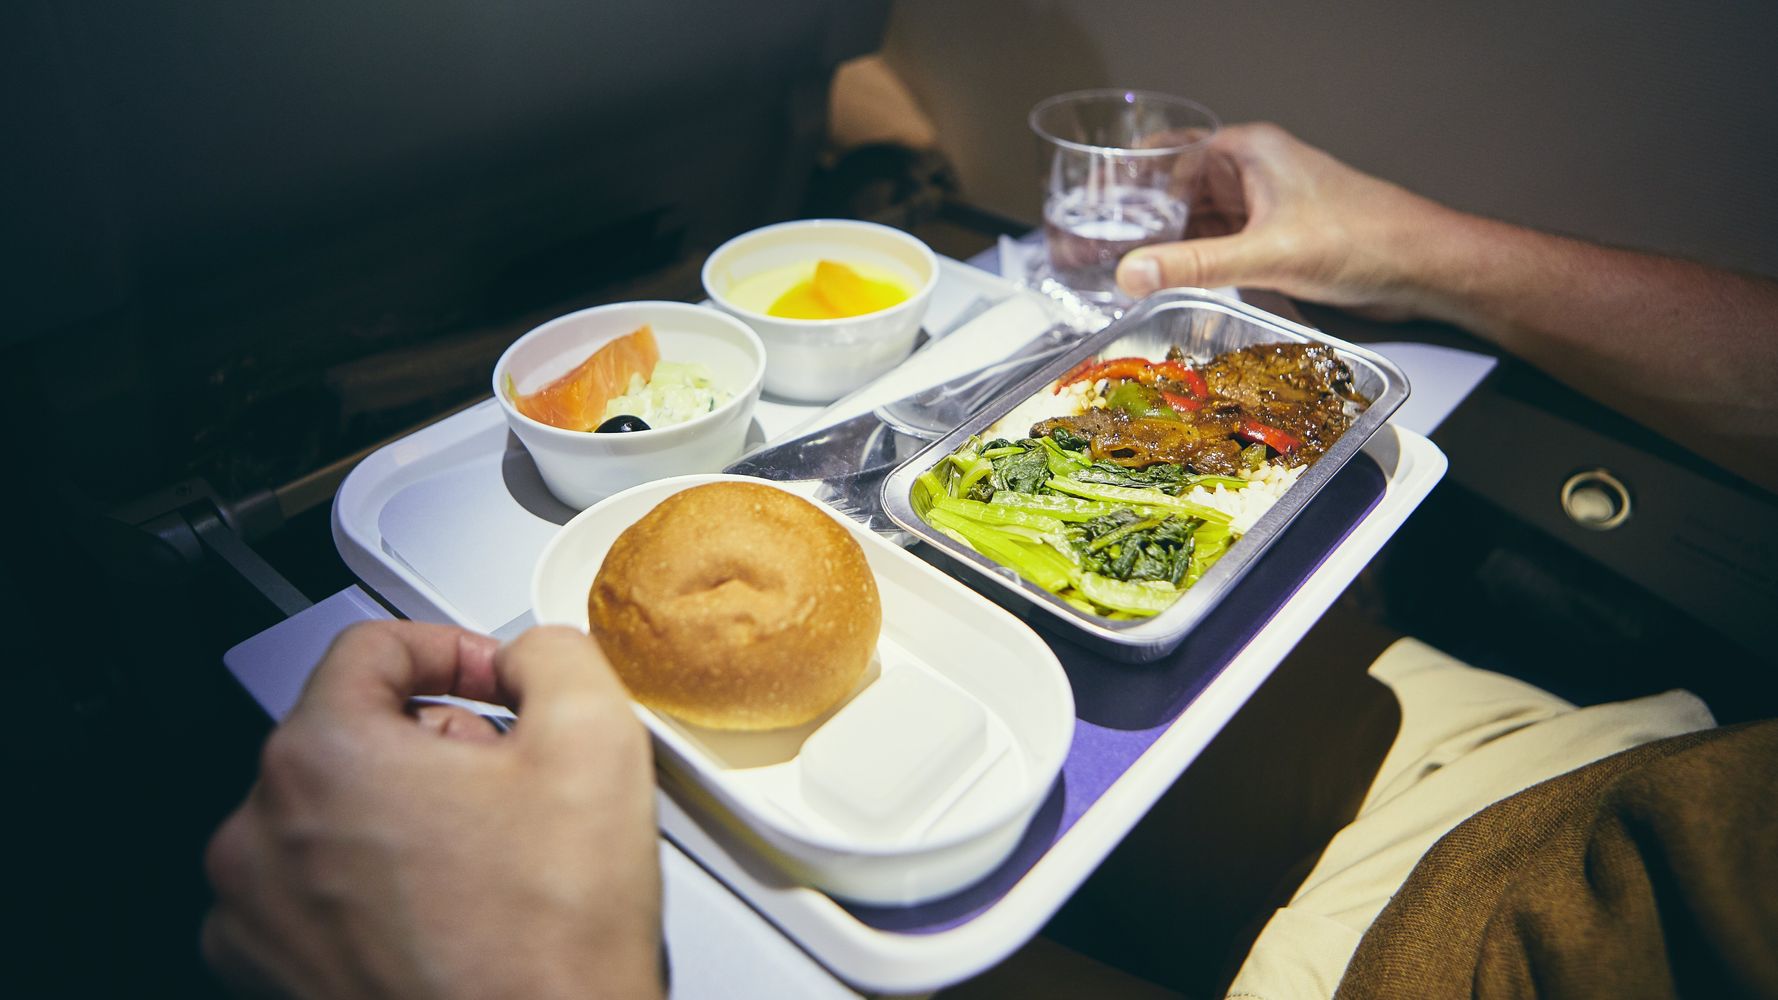 ANA to introduce plastic-free meal trays for economy class flights